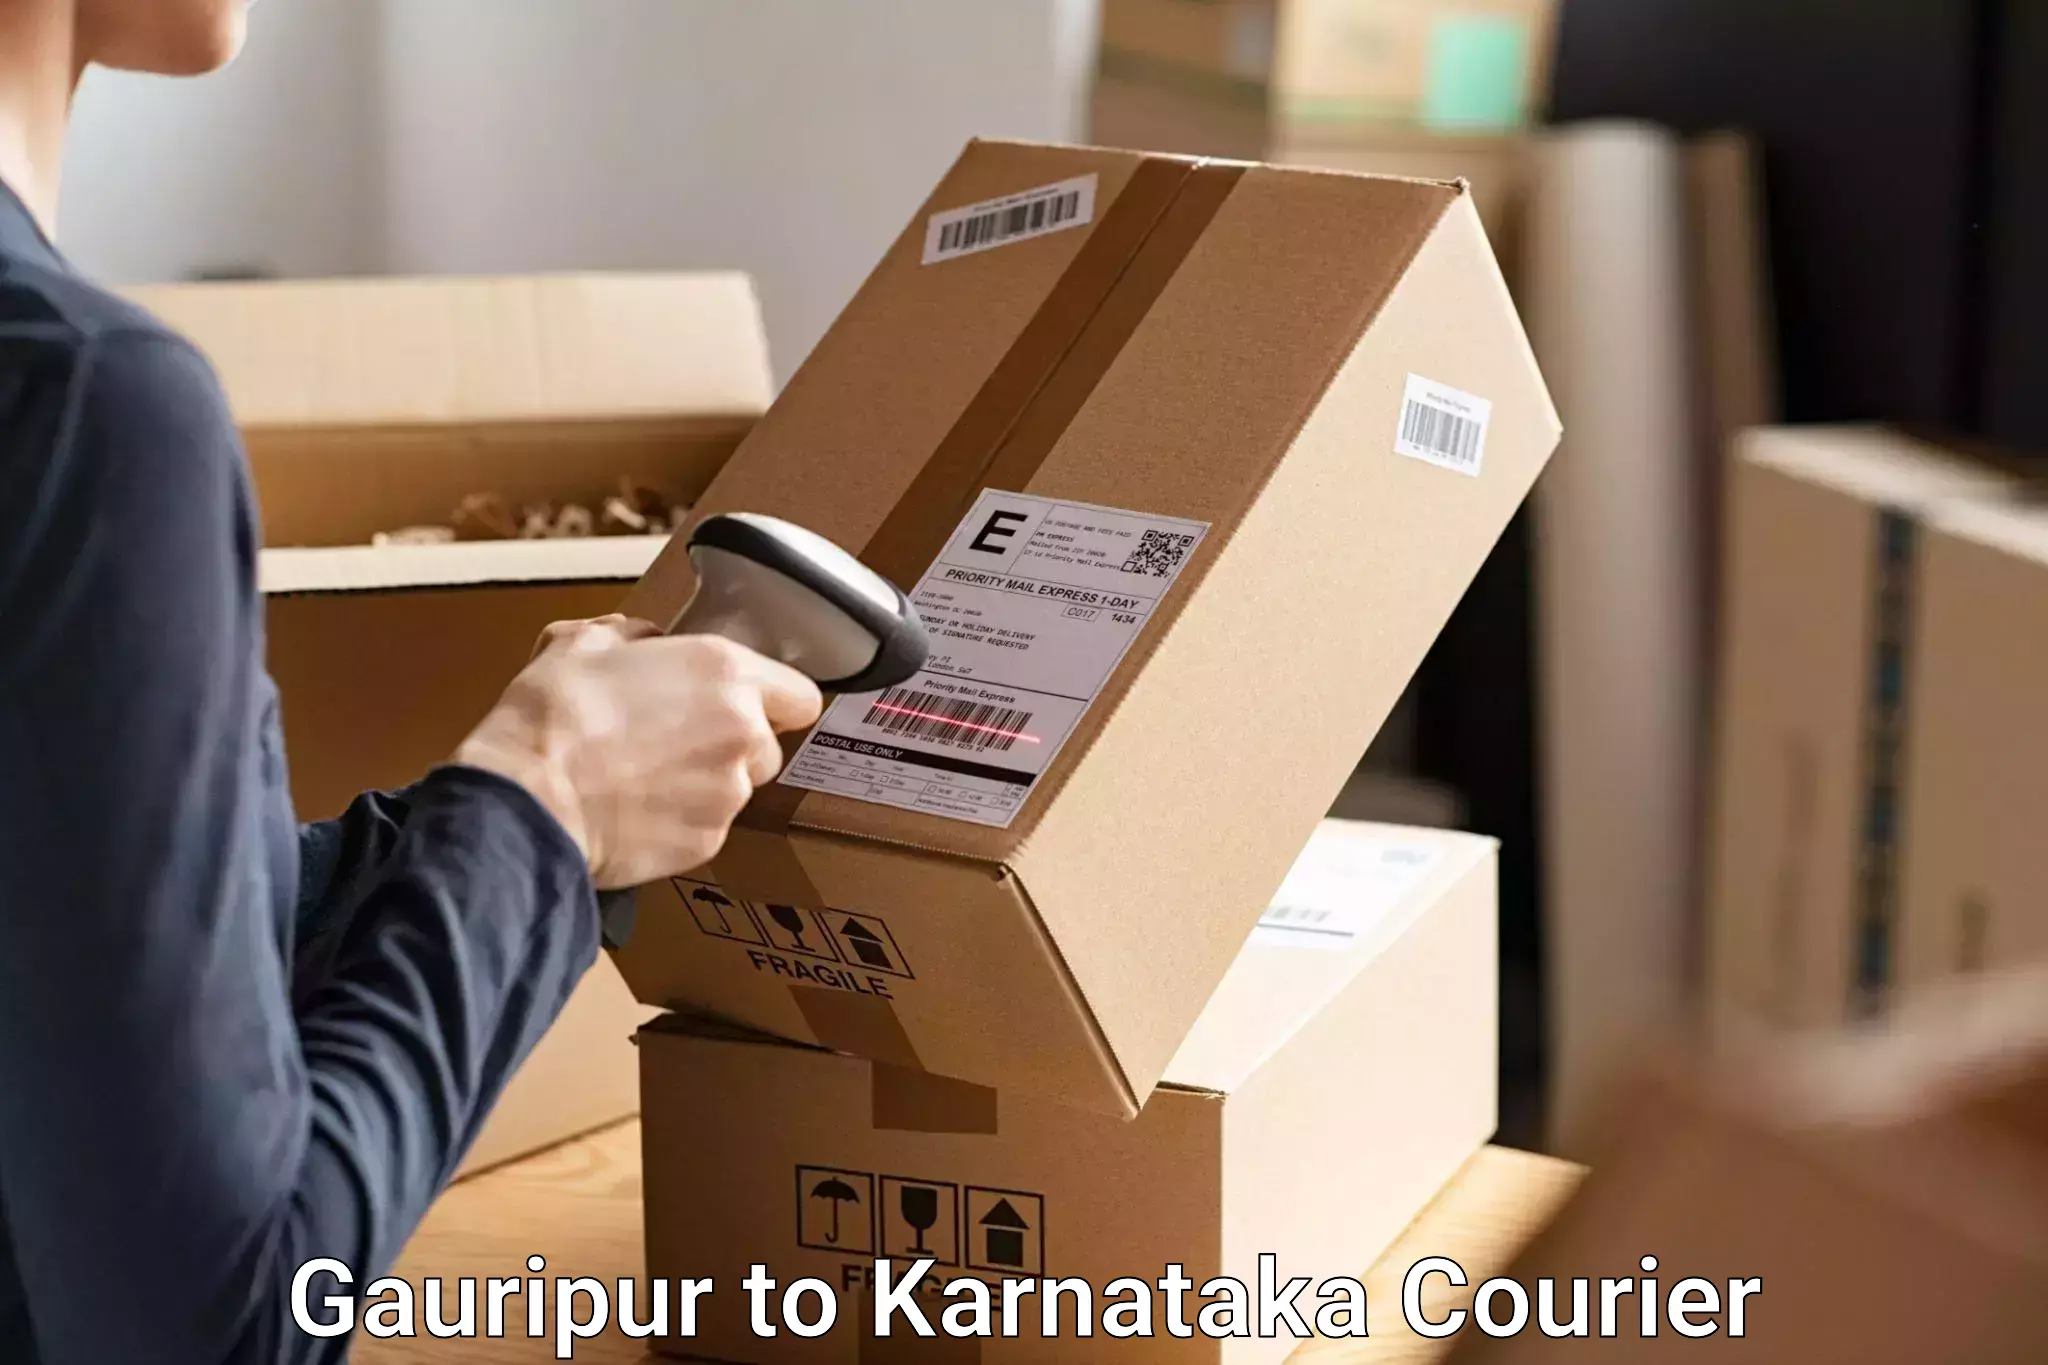 Personal effects shipping in Gauripur to Shorapur